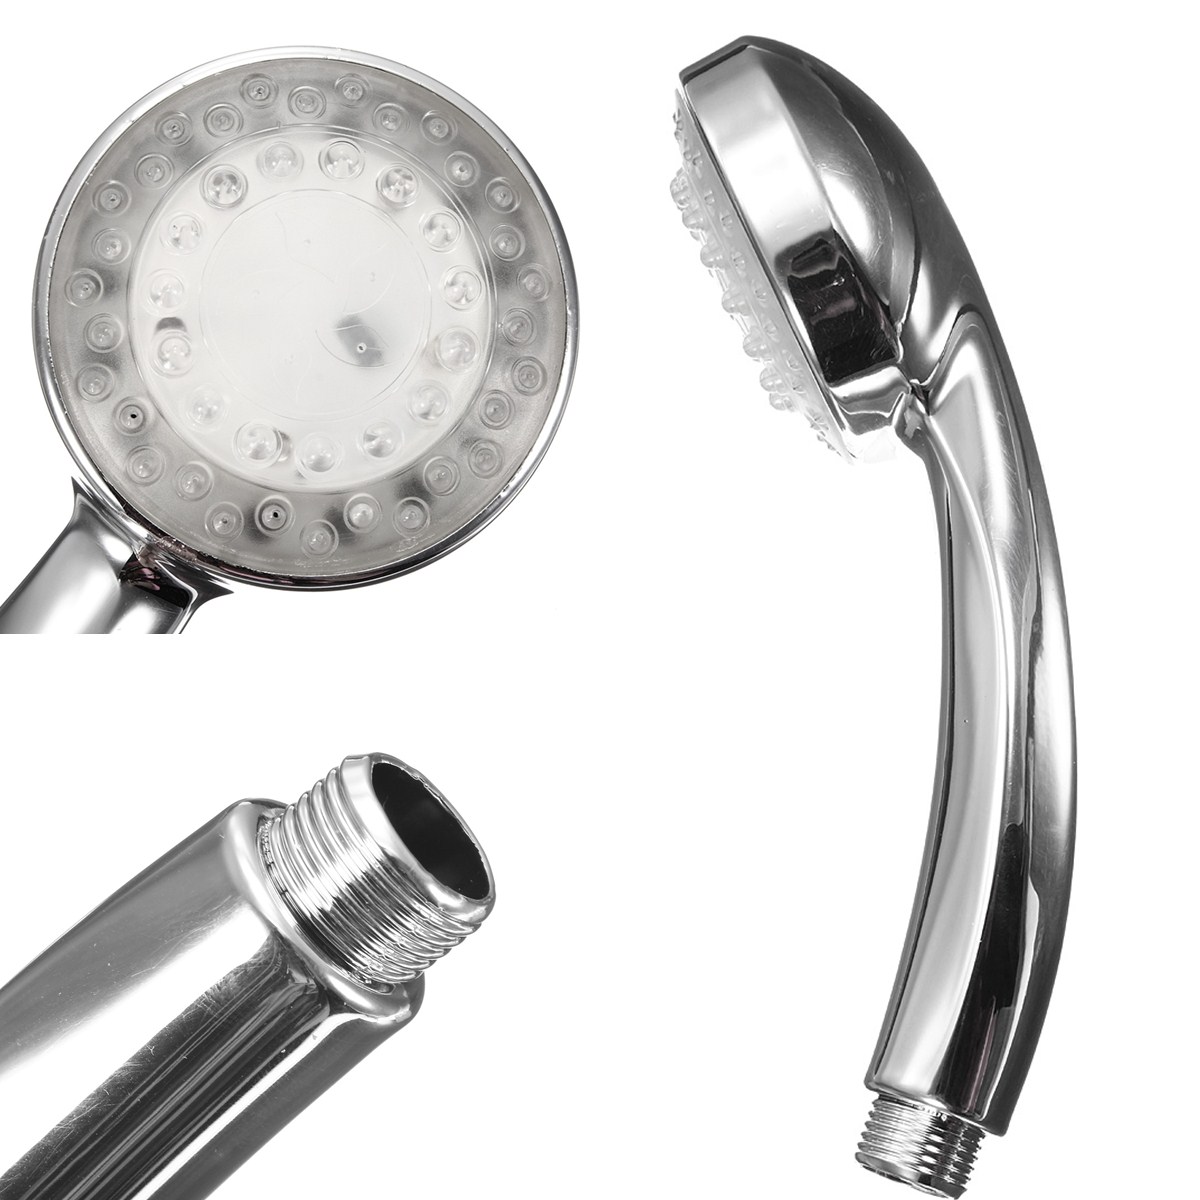 Chrome-Bathroom-Handheld-ABS-LED-Shower-Head-7-Color-Changing-Water-Glow-Light-1442625-4